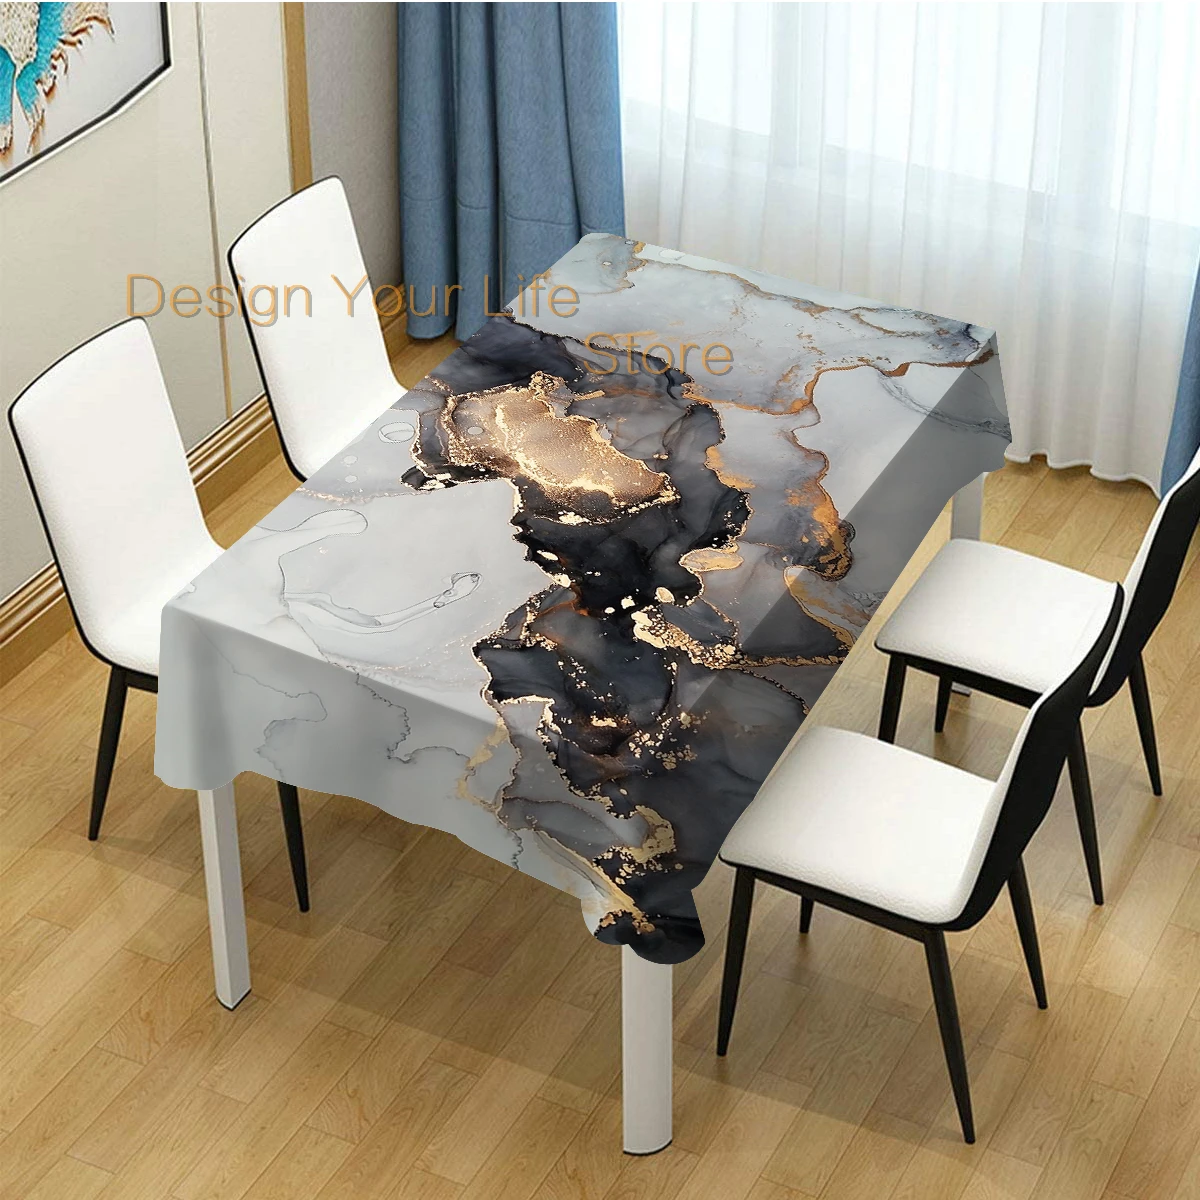 

Abstract Art Prints of Paintings Dining Room Kitchen Table Cover